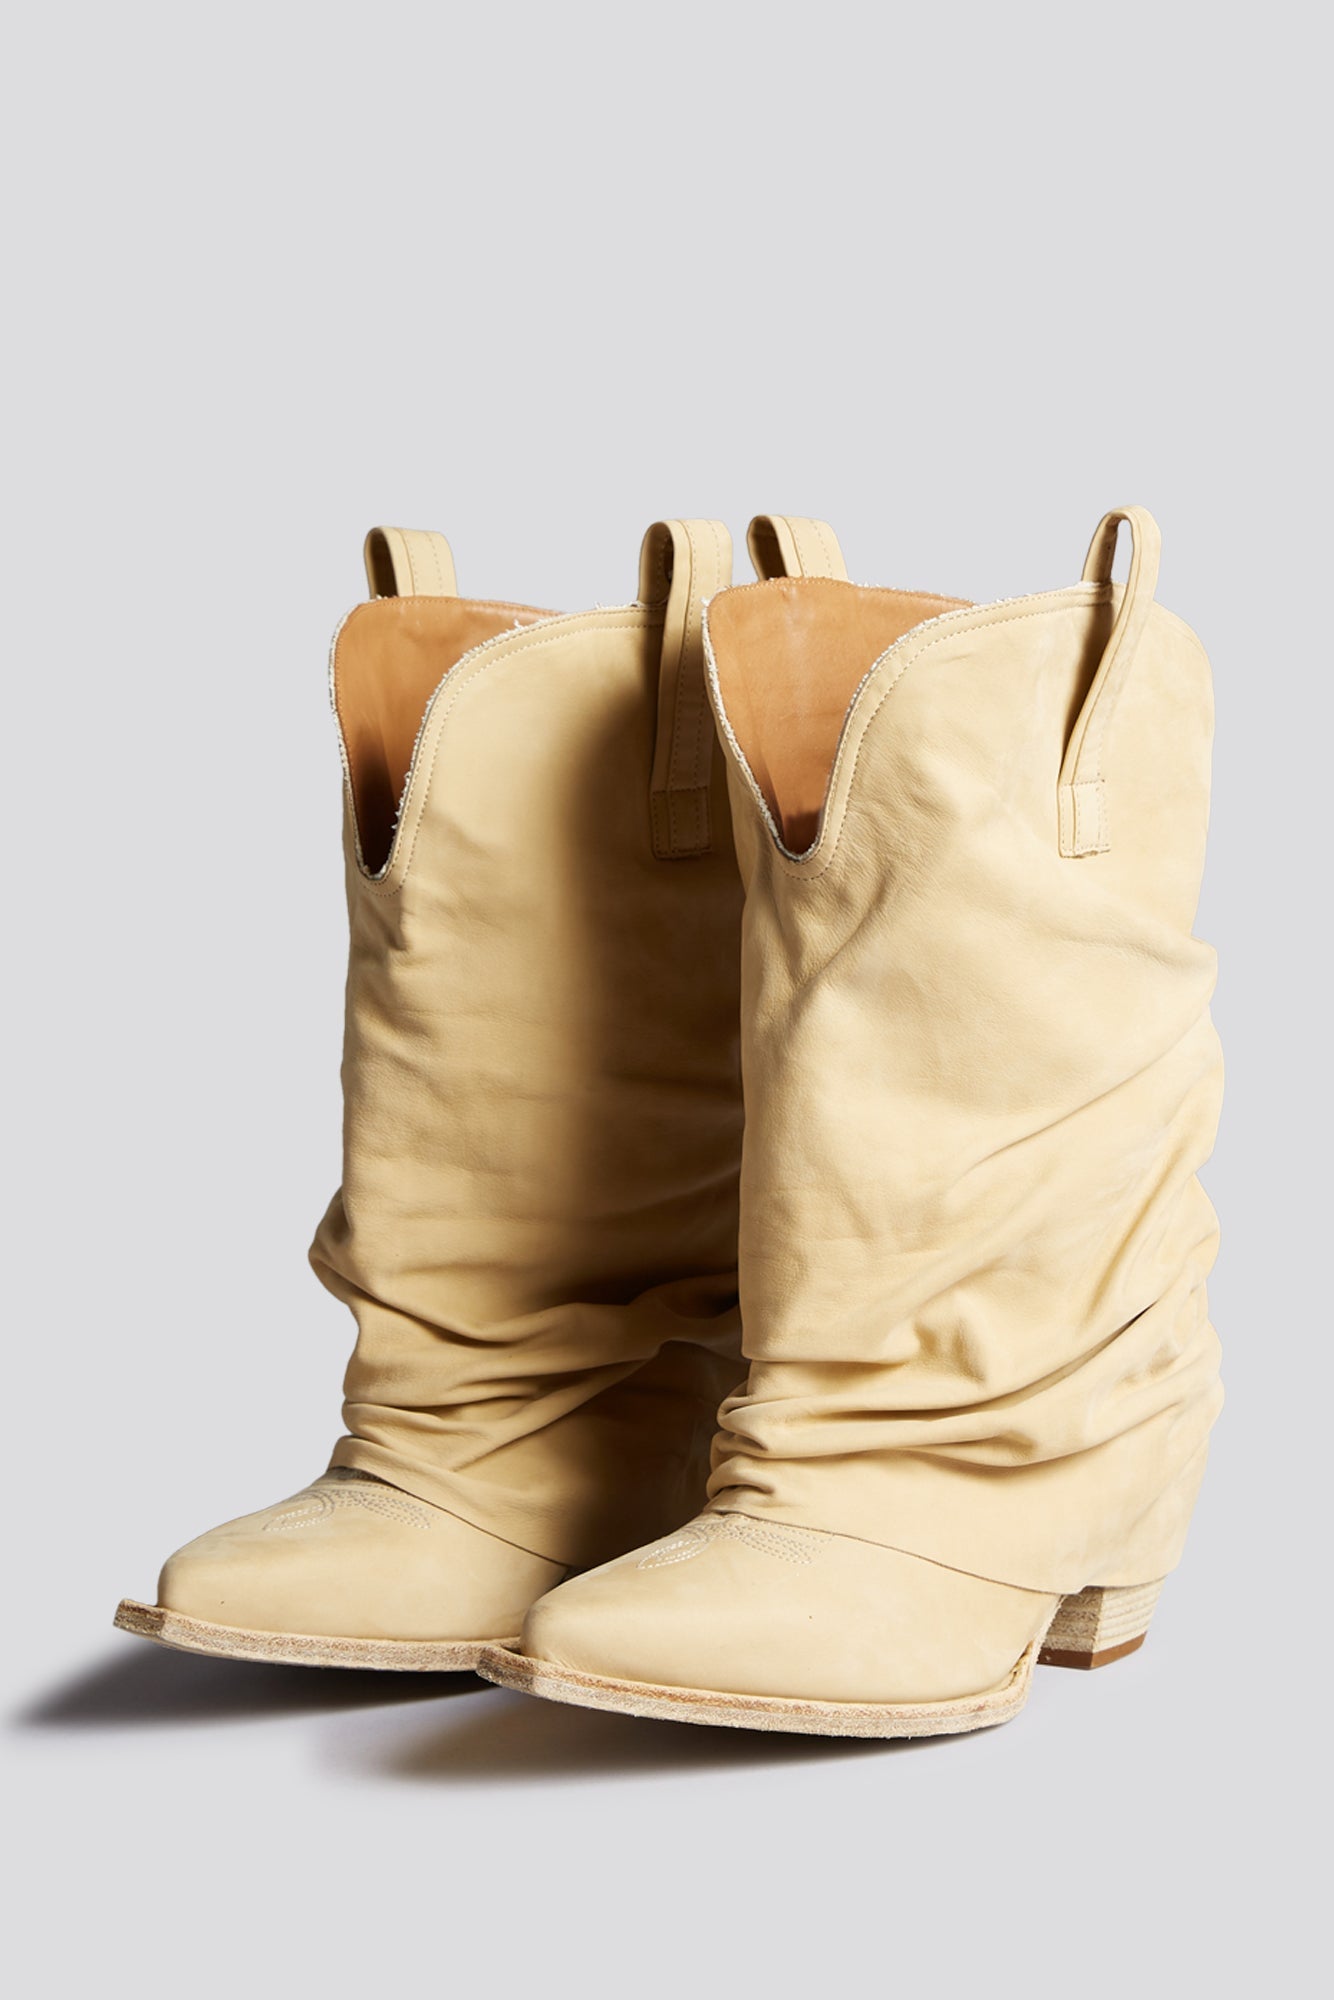 LOW RIDER COWBOY BOOT - WHEAT